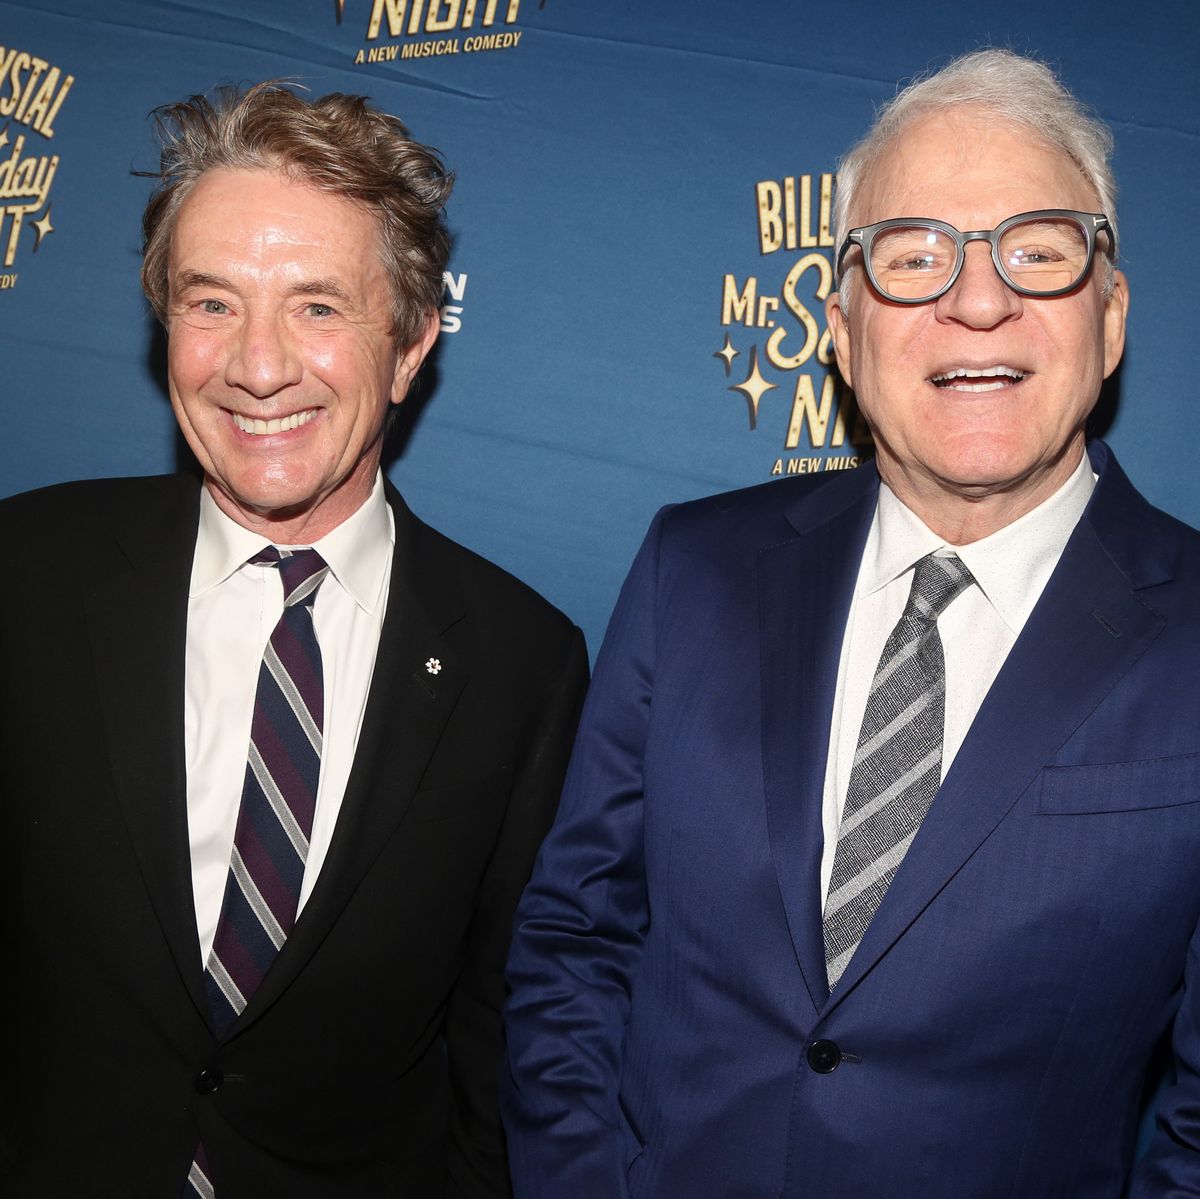 Marty just kept following me!' Steve Martin and Martin Short on their  35-year friendship, Television & radio